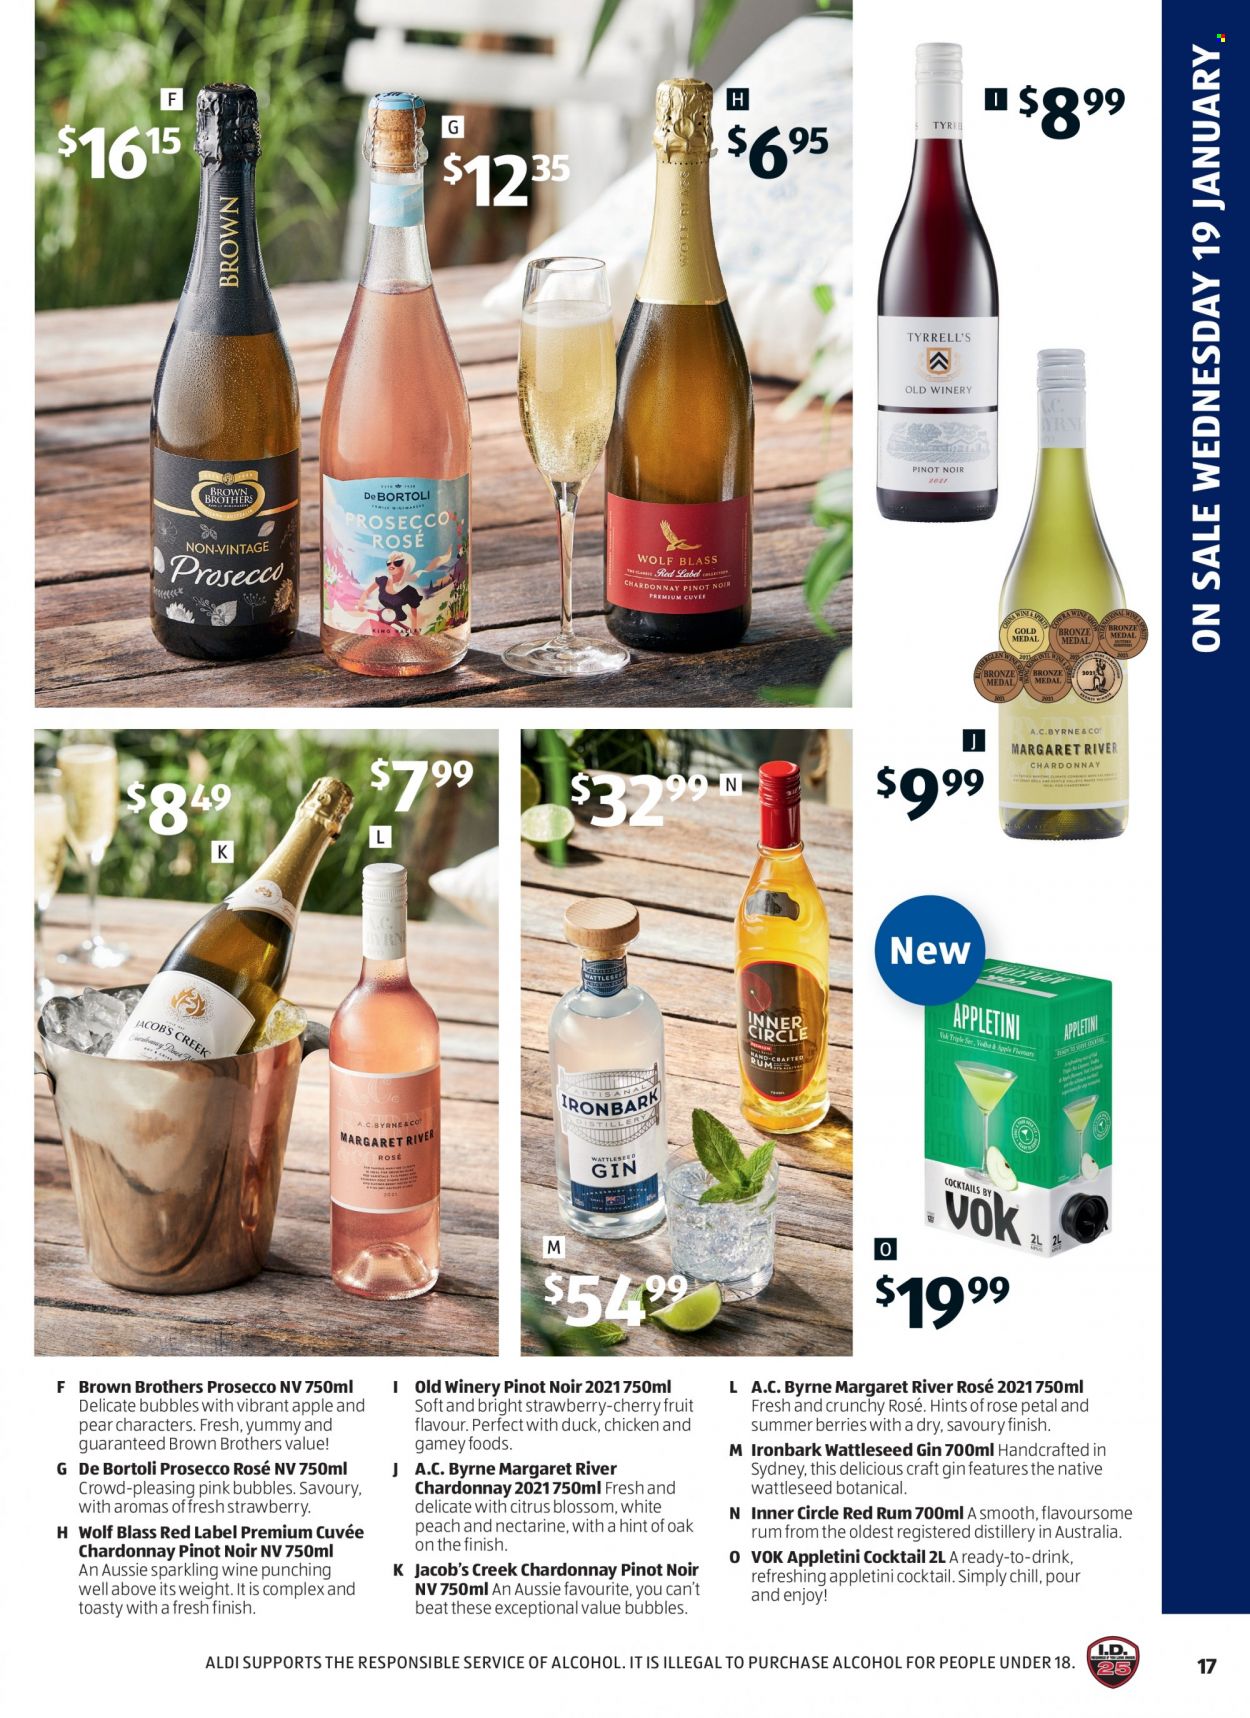 thumbnail - ALDI Catalogue - 19 Jan 2022 - 25 Jan 2022 - Sales products - nectarines, pears, Blossom, red wine, sparkling wine, white wine, prosecco, Chardonnay, wine, Pinot Noir, Cuvée, Jacob's Creek, rosé wine, gin, rum, BROTHERS, Aussie. Page 17.